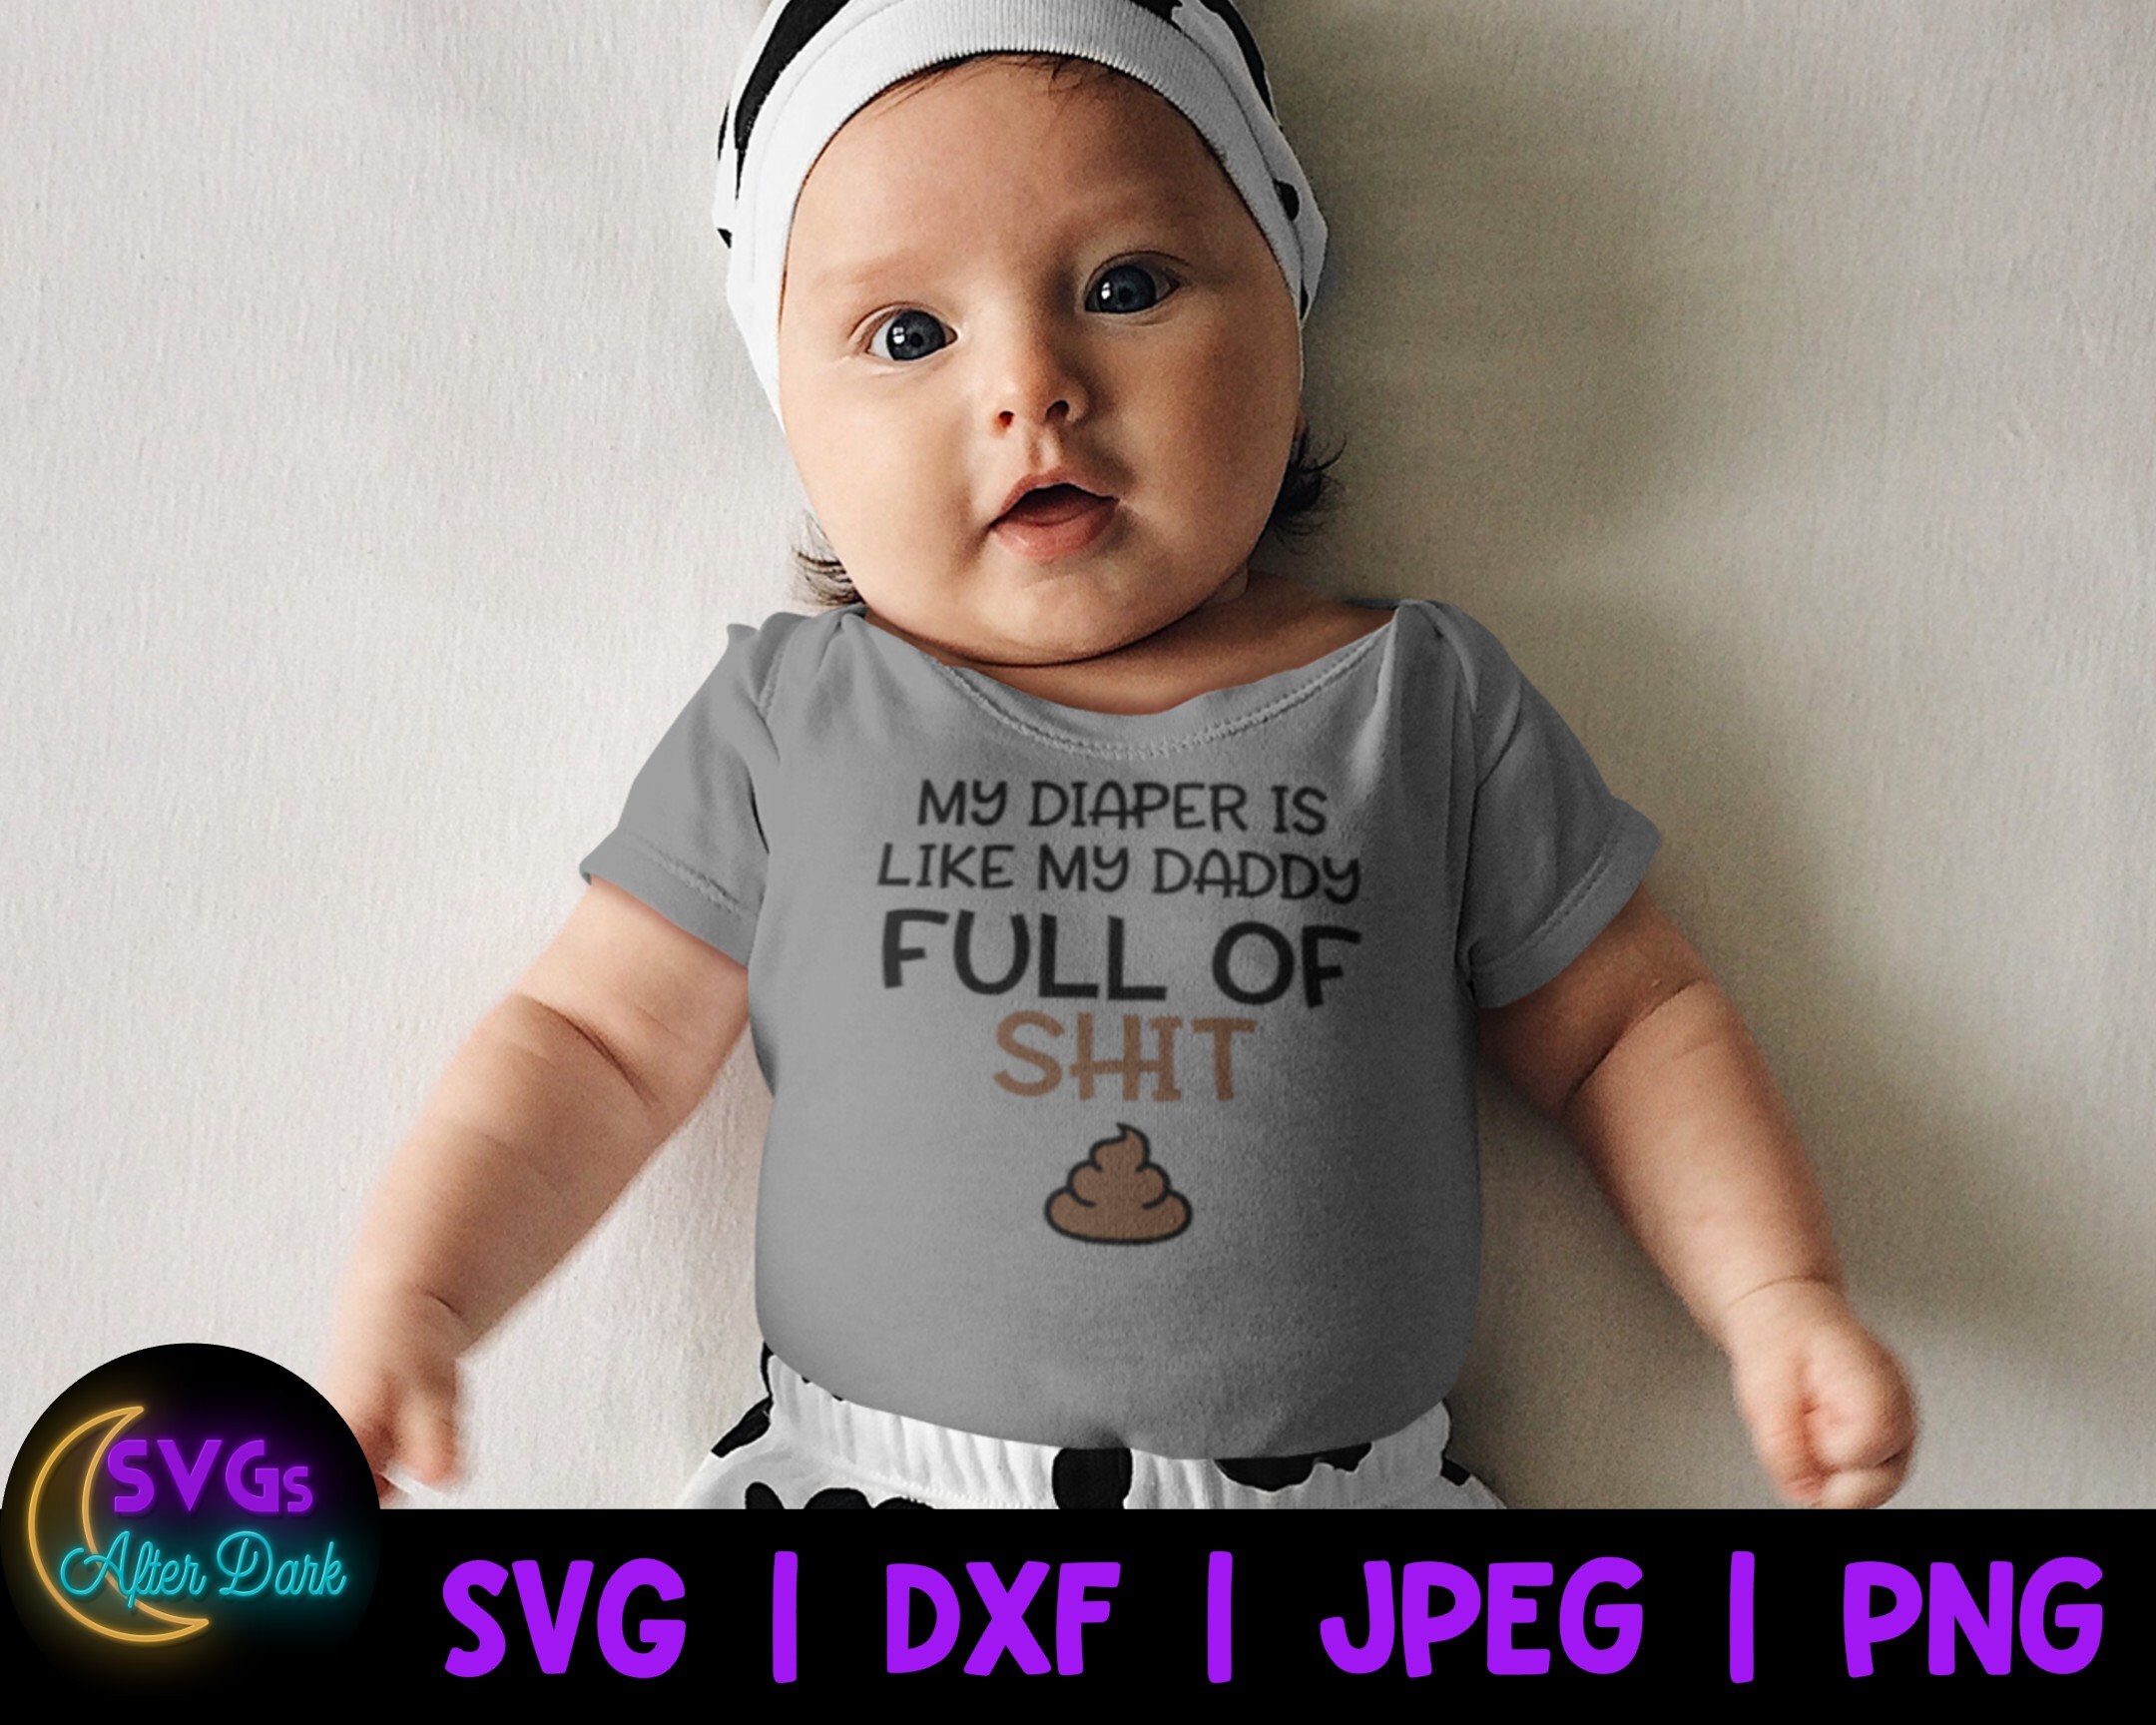 NSFW SVG My Diaper is Like my Daddy Full of Shit SVG Adult | Etsy